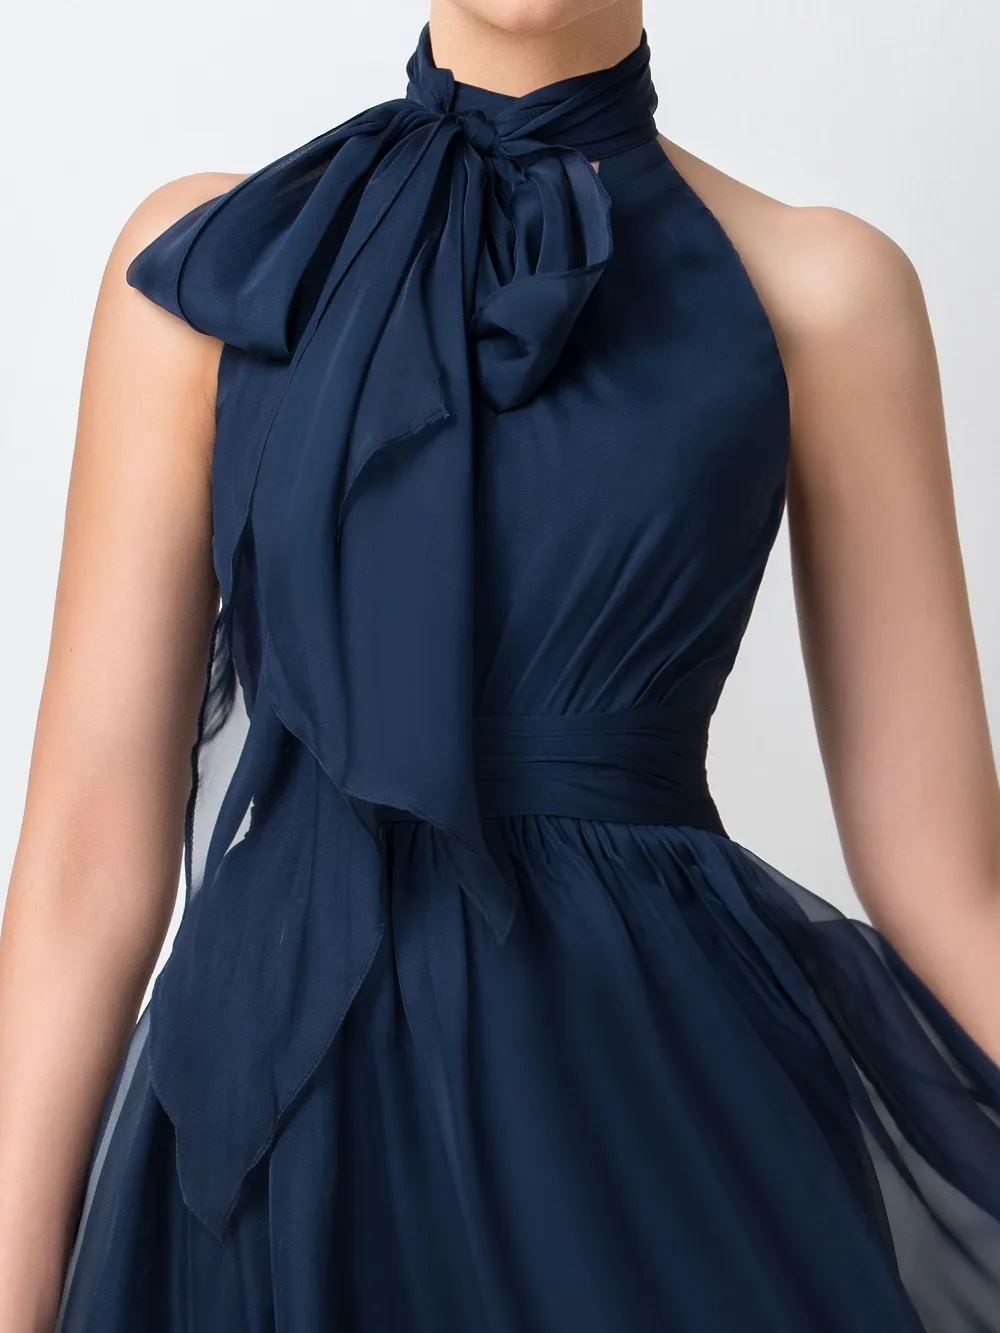 Navy Blue Short Bridesmaid Dress High Neck Chiffon Maid of Honor Dress For Junior Wedding Party Gown